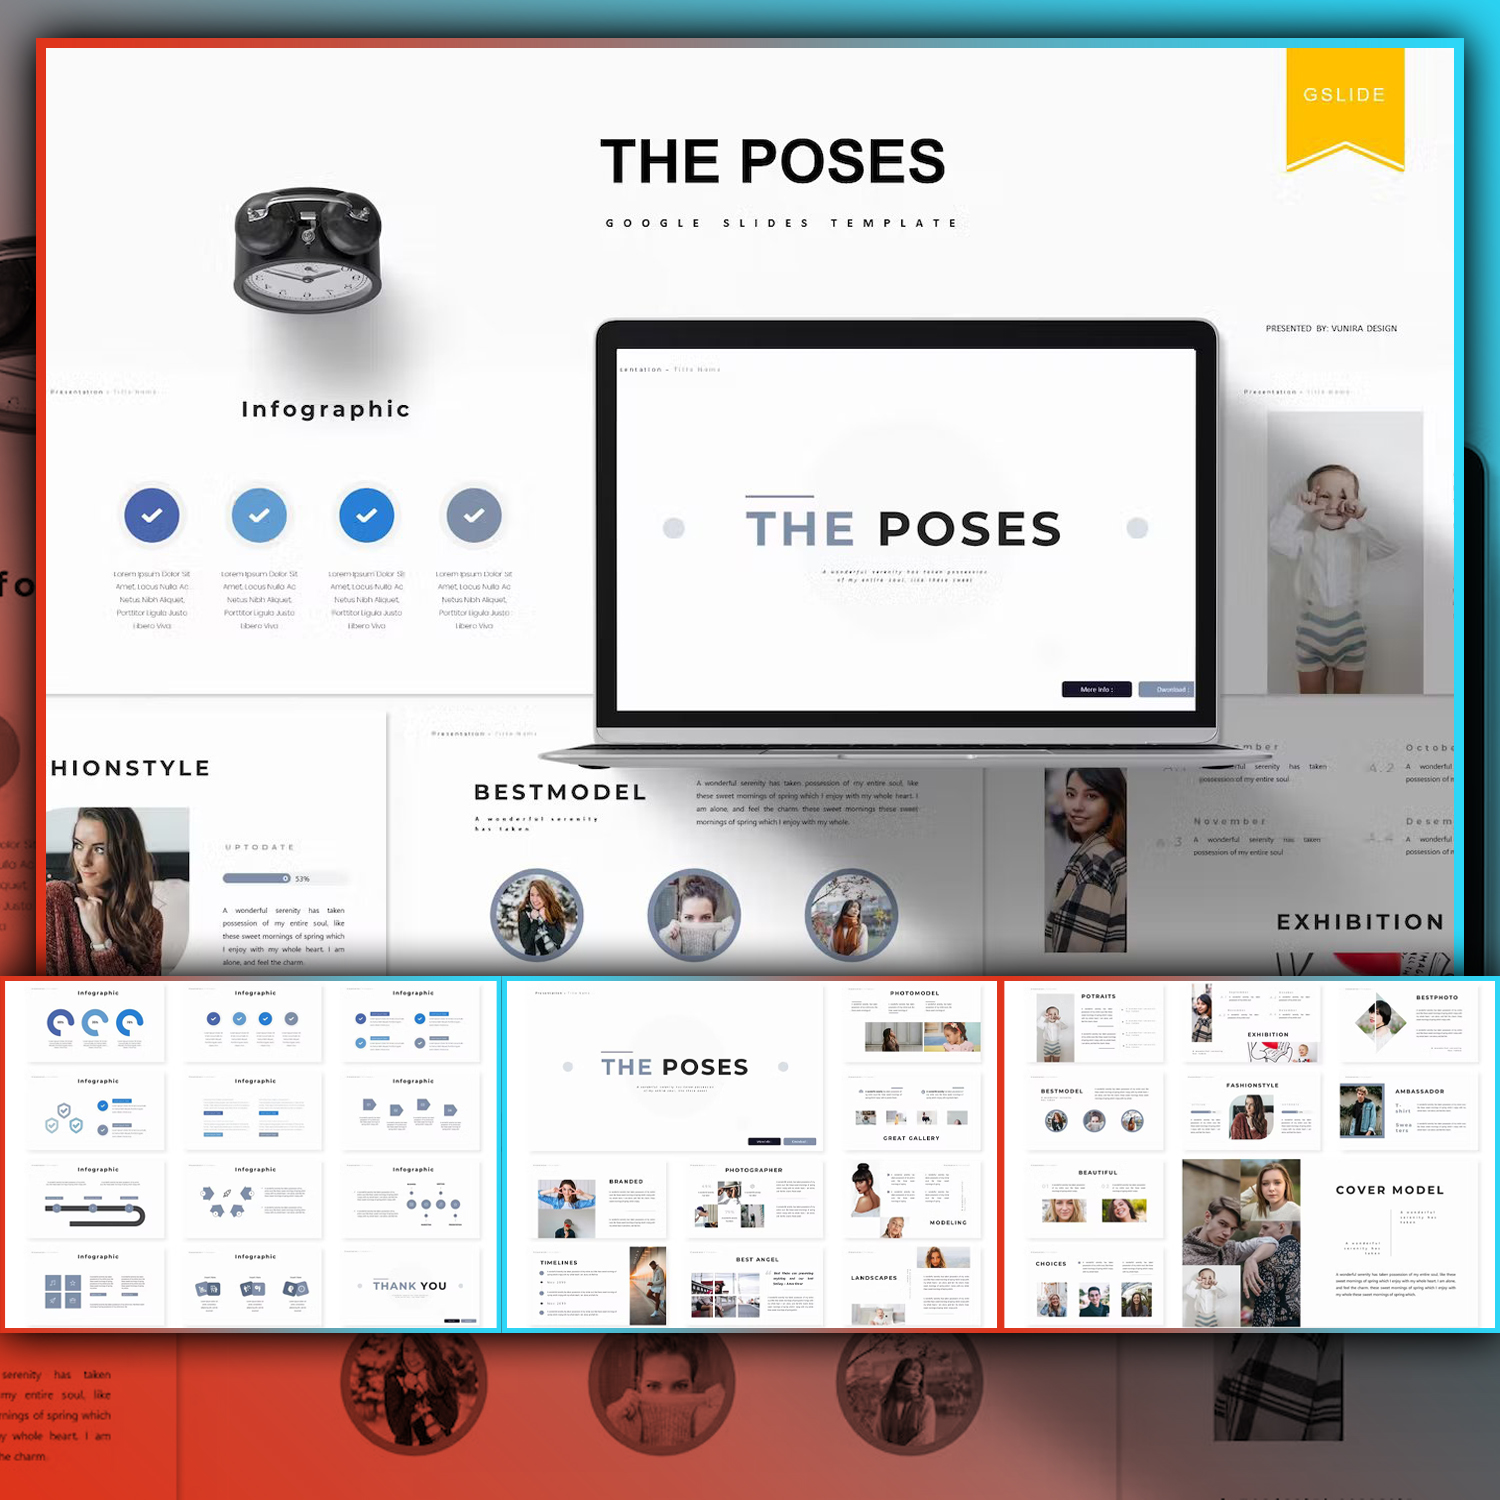 The Poses | Google Slides Template.